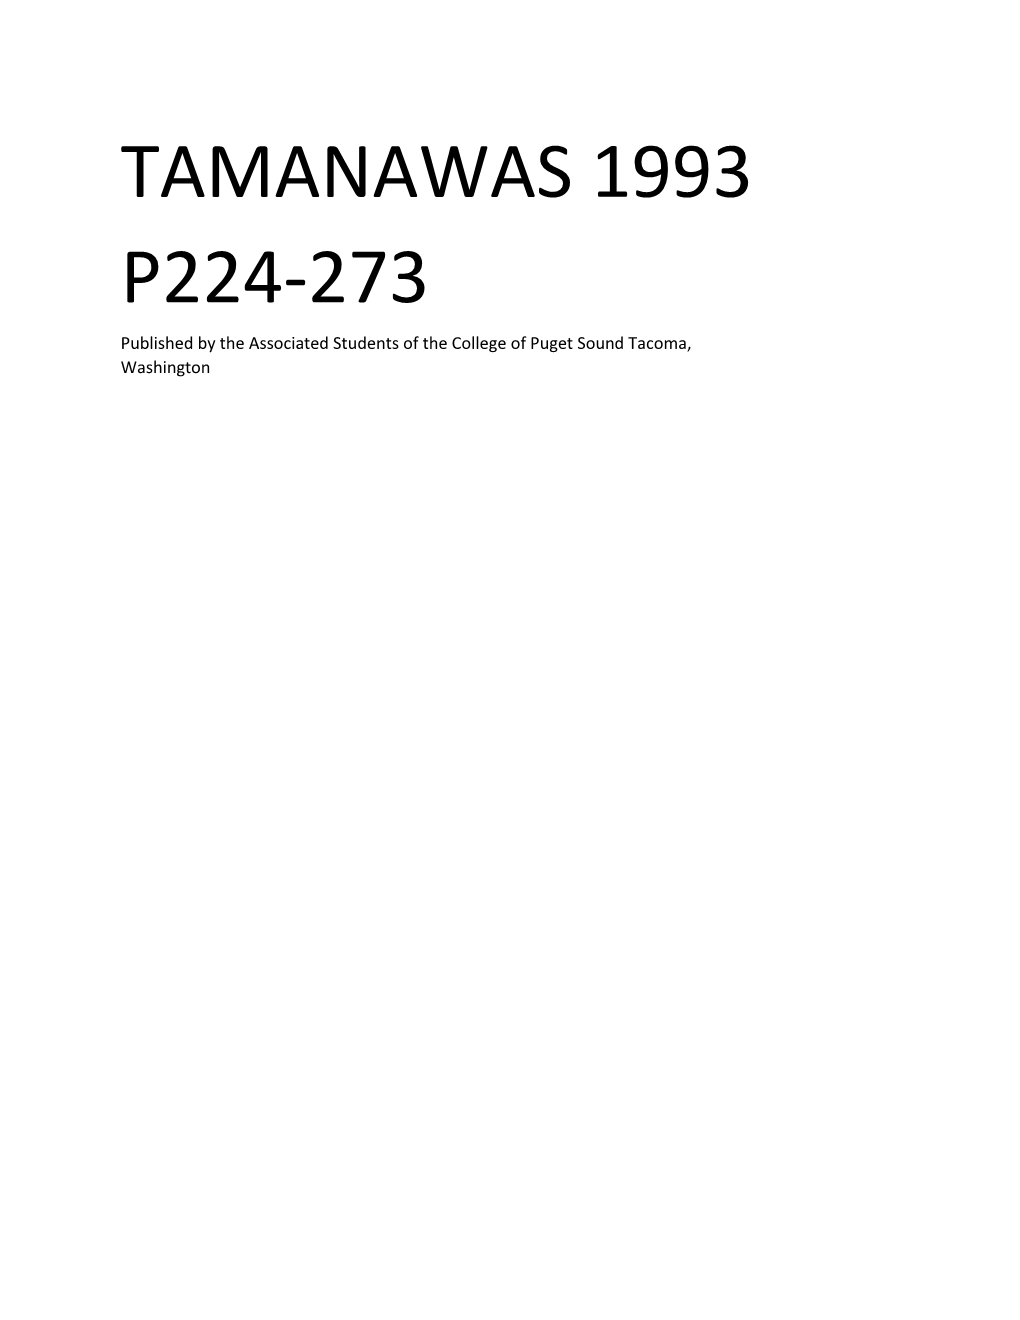 TAMANAWAS 1993 P224-273 Published by the Associated Students of the College of Puget Sound Tacoma, Washington